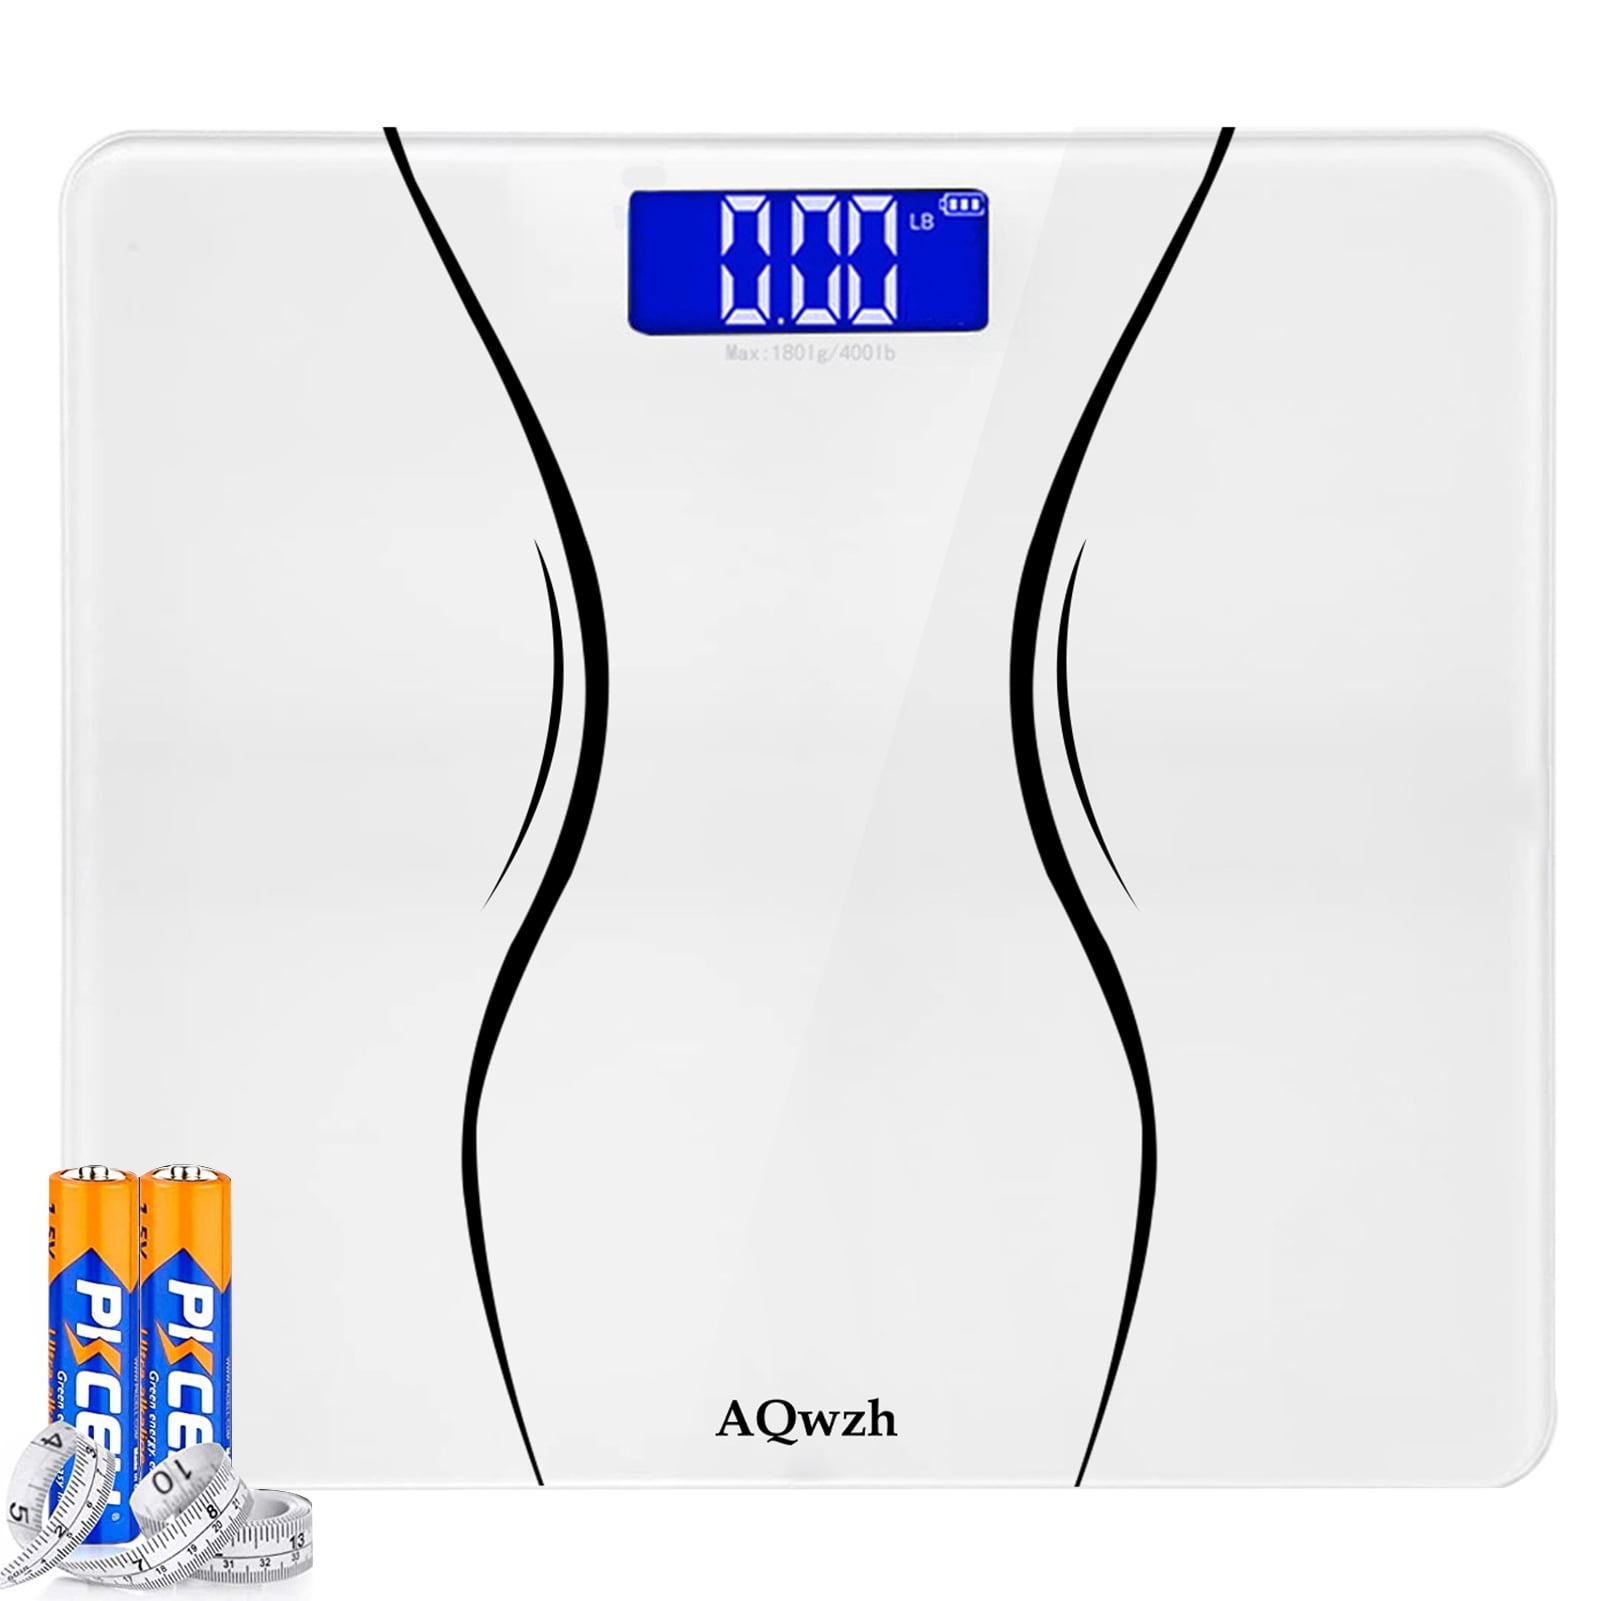 Ozeri WeightMaster II 440 lbs Digital Bath Scale with BMI and Weight Change Detection Black